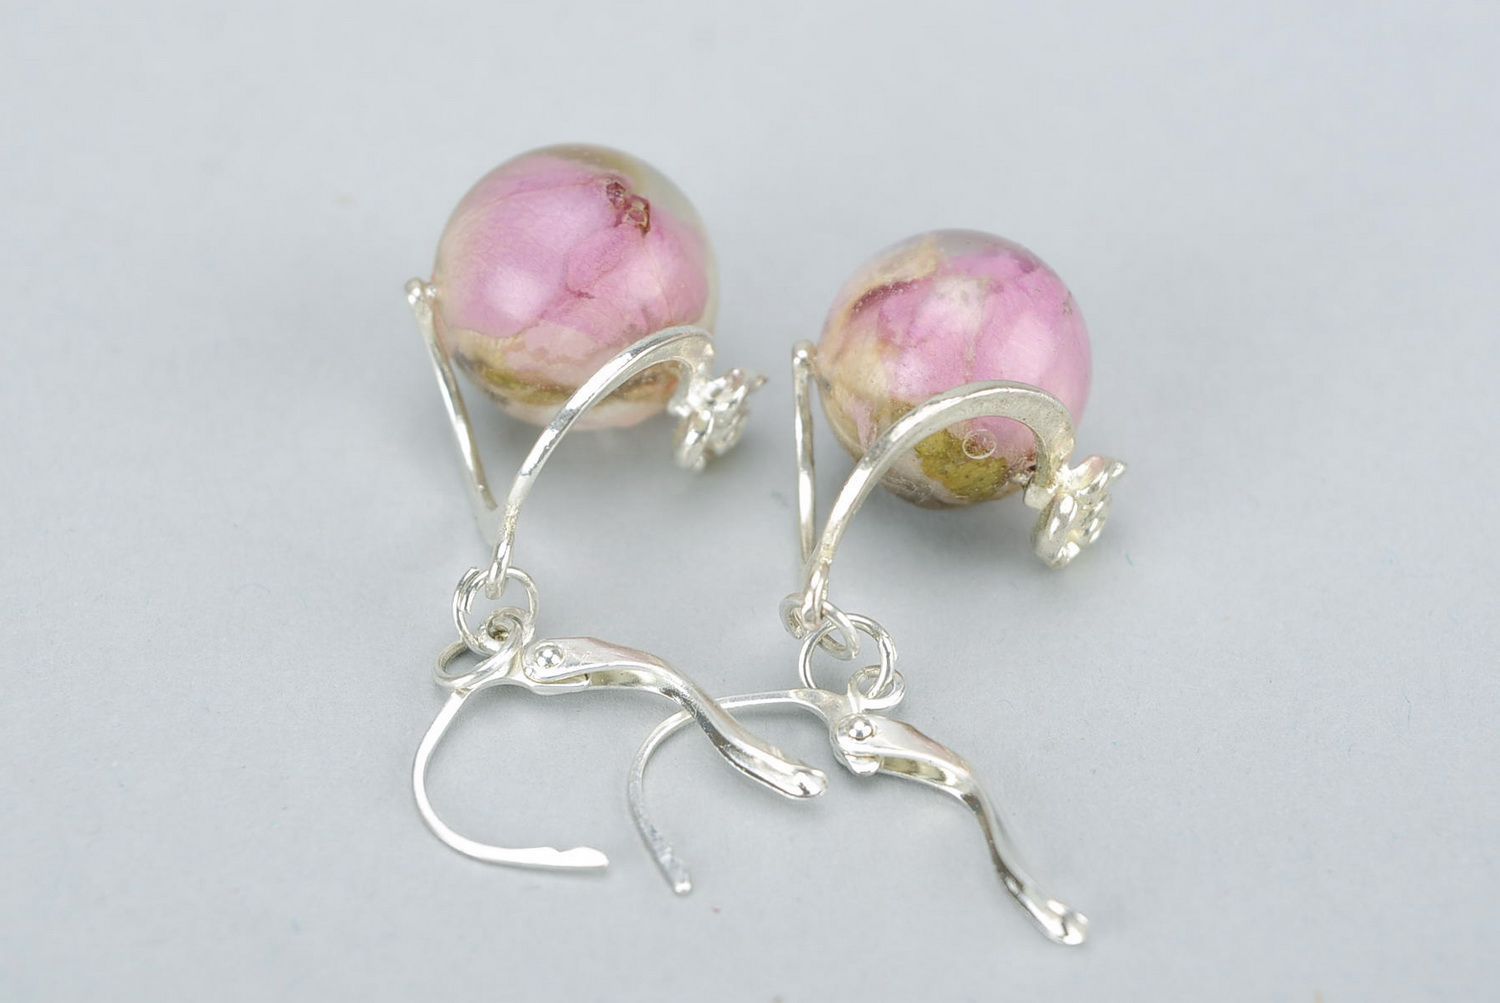 Earrings made from buds of a tea rose photo 4